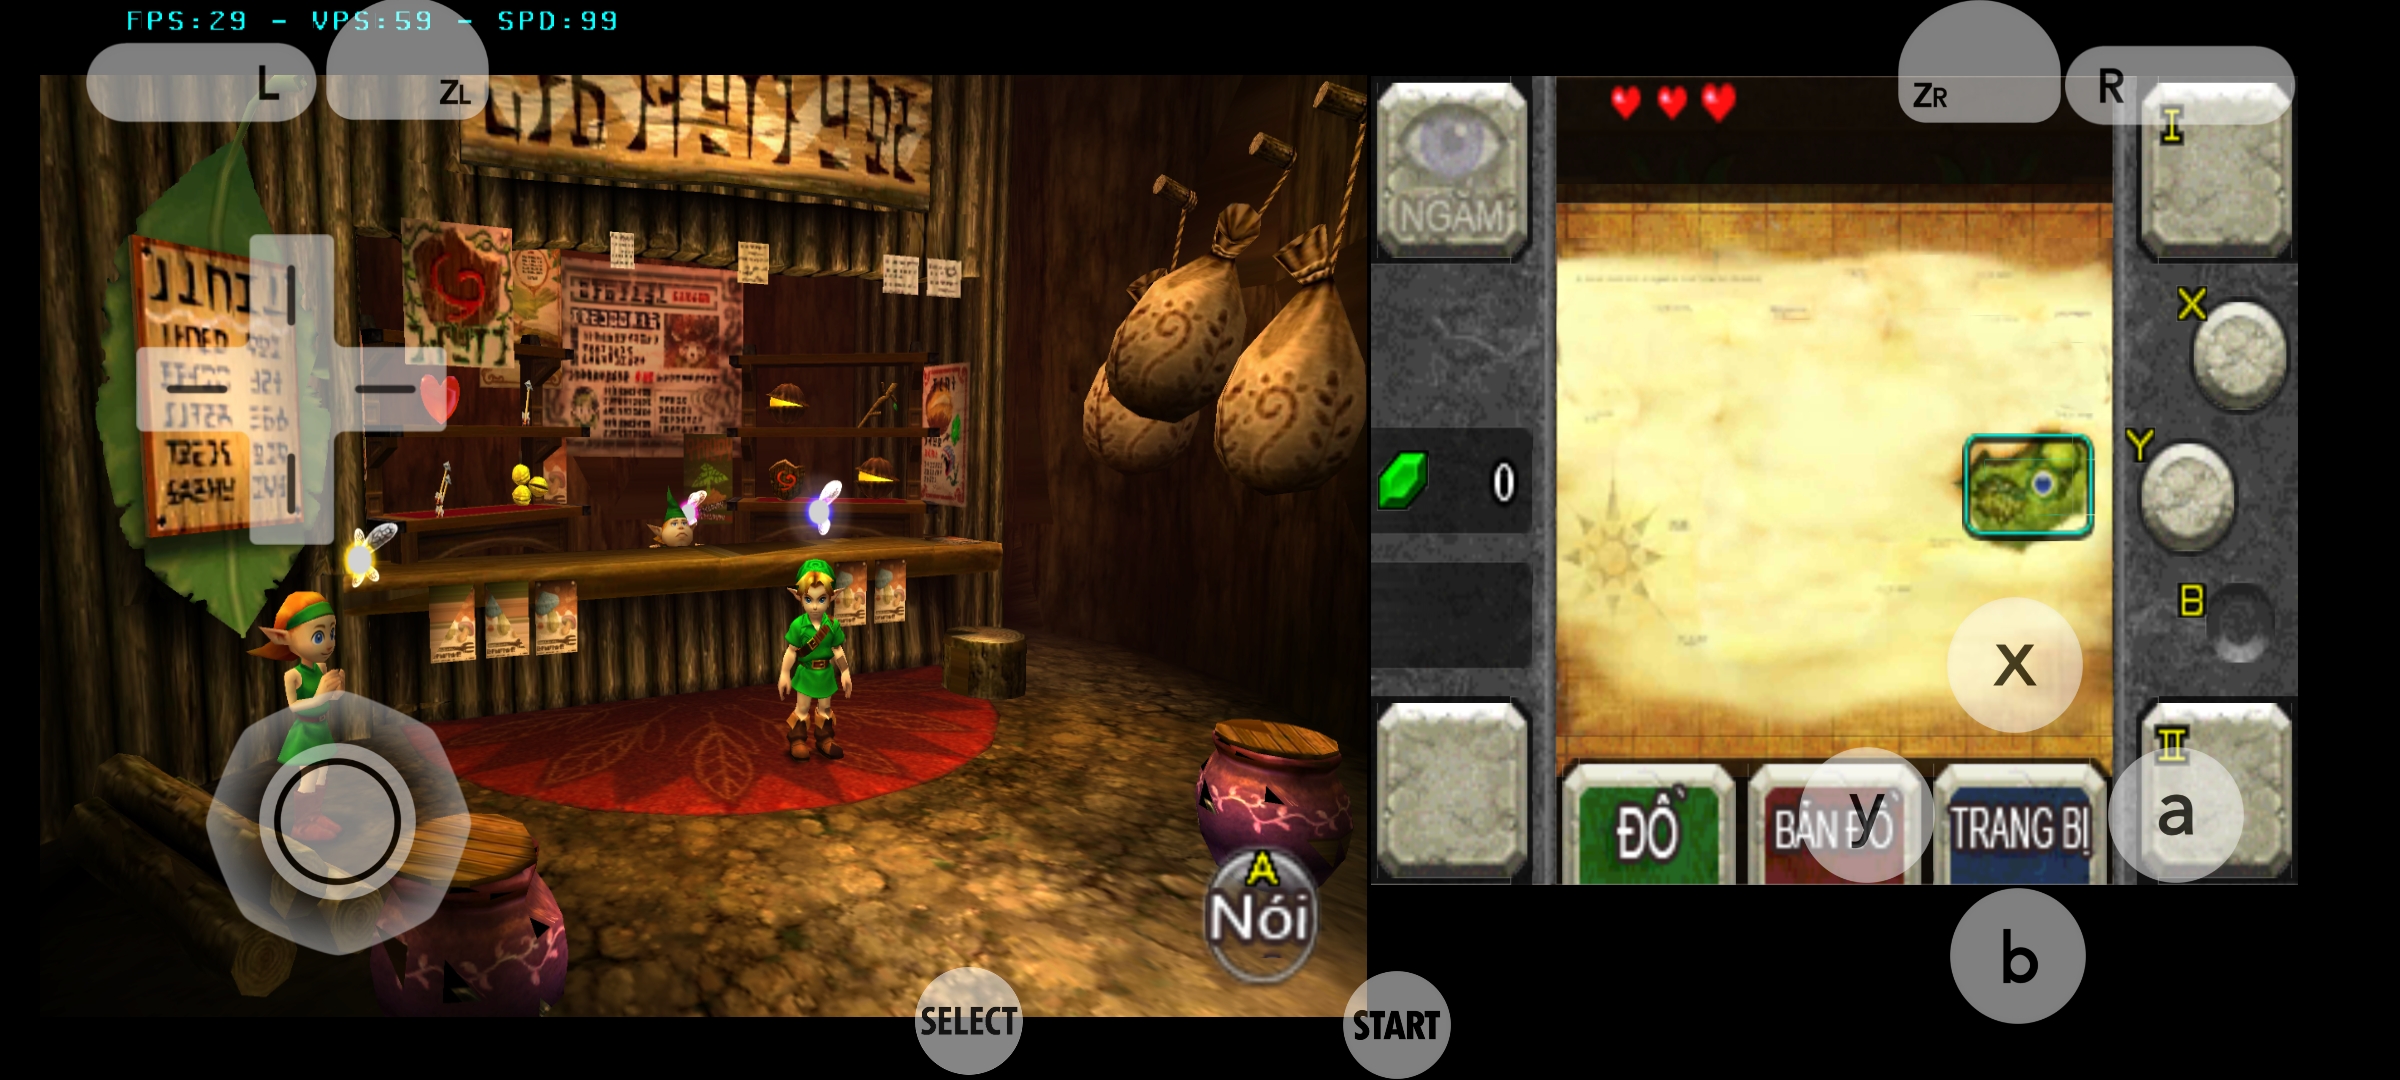 Game 3DS The Legend of Zelda: Ocarina of Time 3D Việt Hóa Cho Android